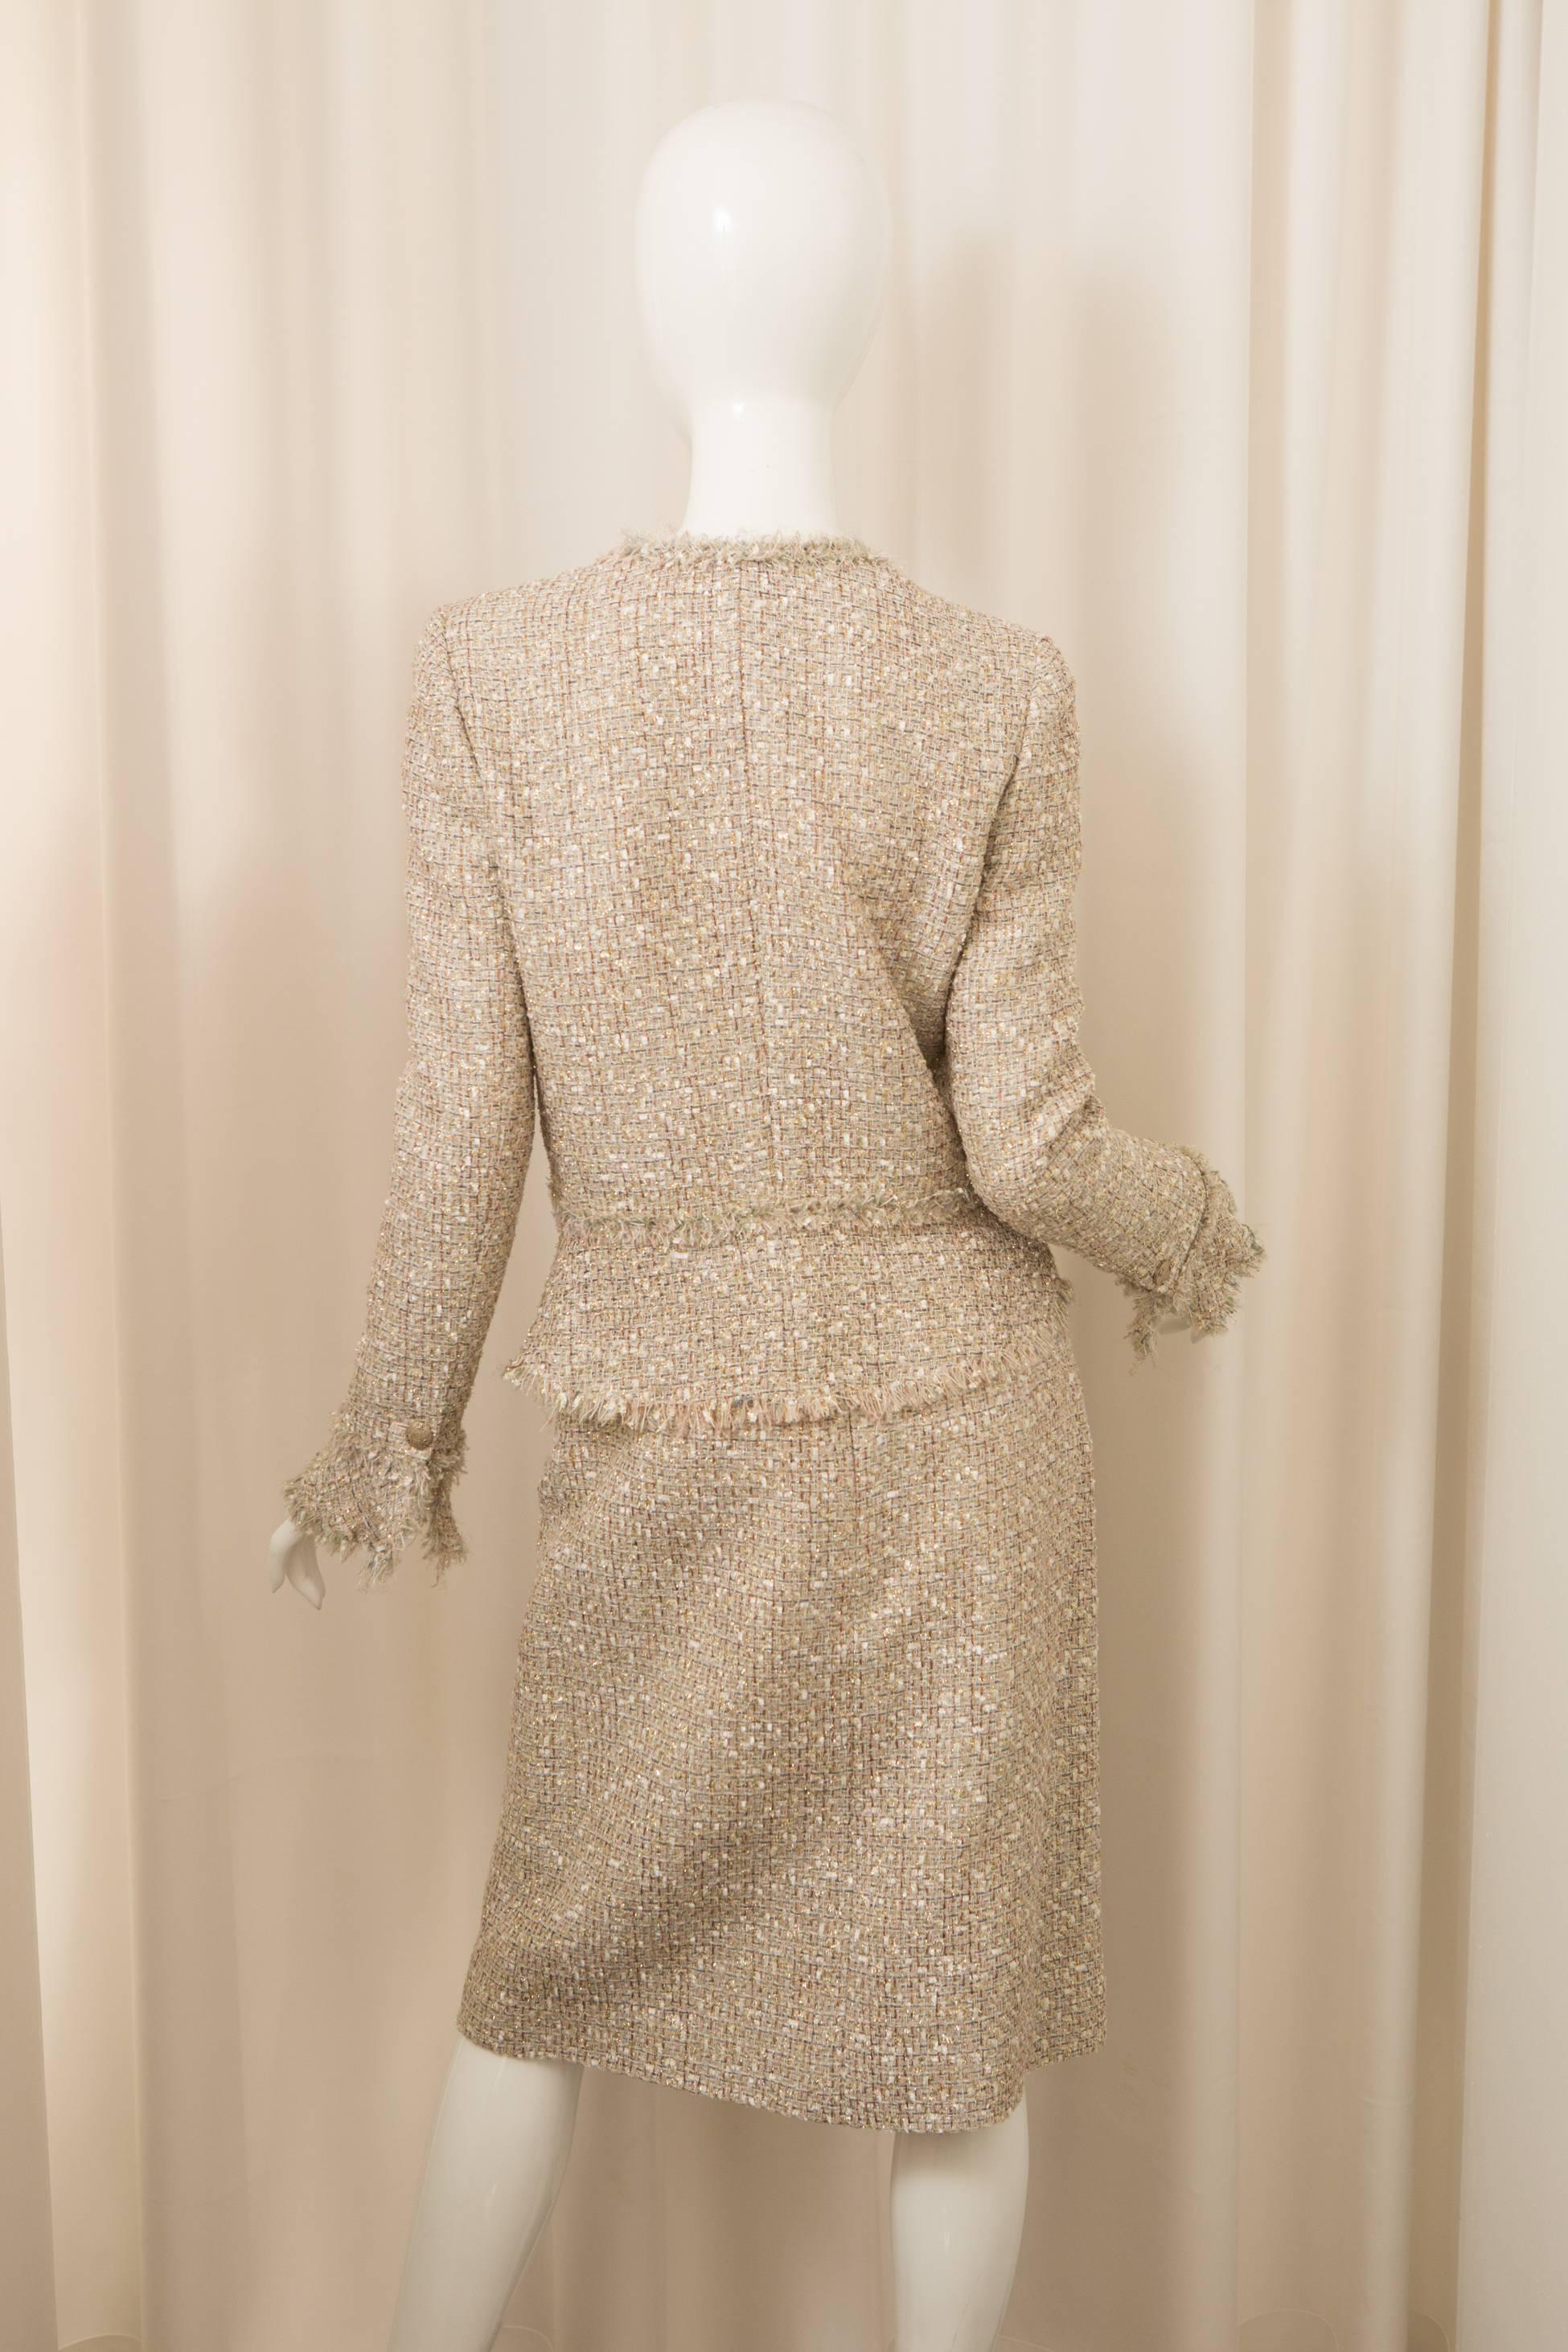 Chanel Two piece metallic skirt suit with bell sleeves in iconic Tweed with fringed edges. 
